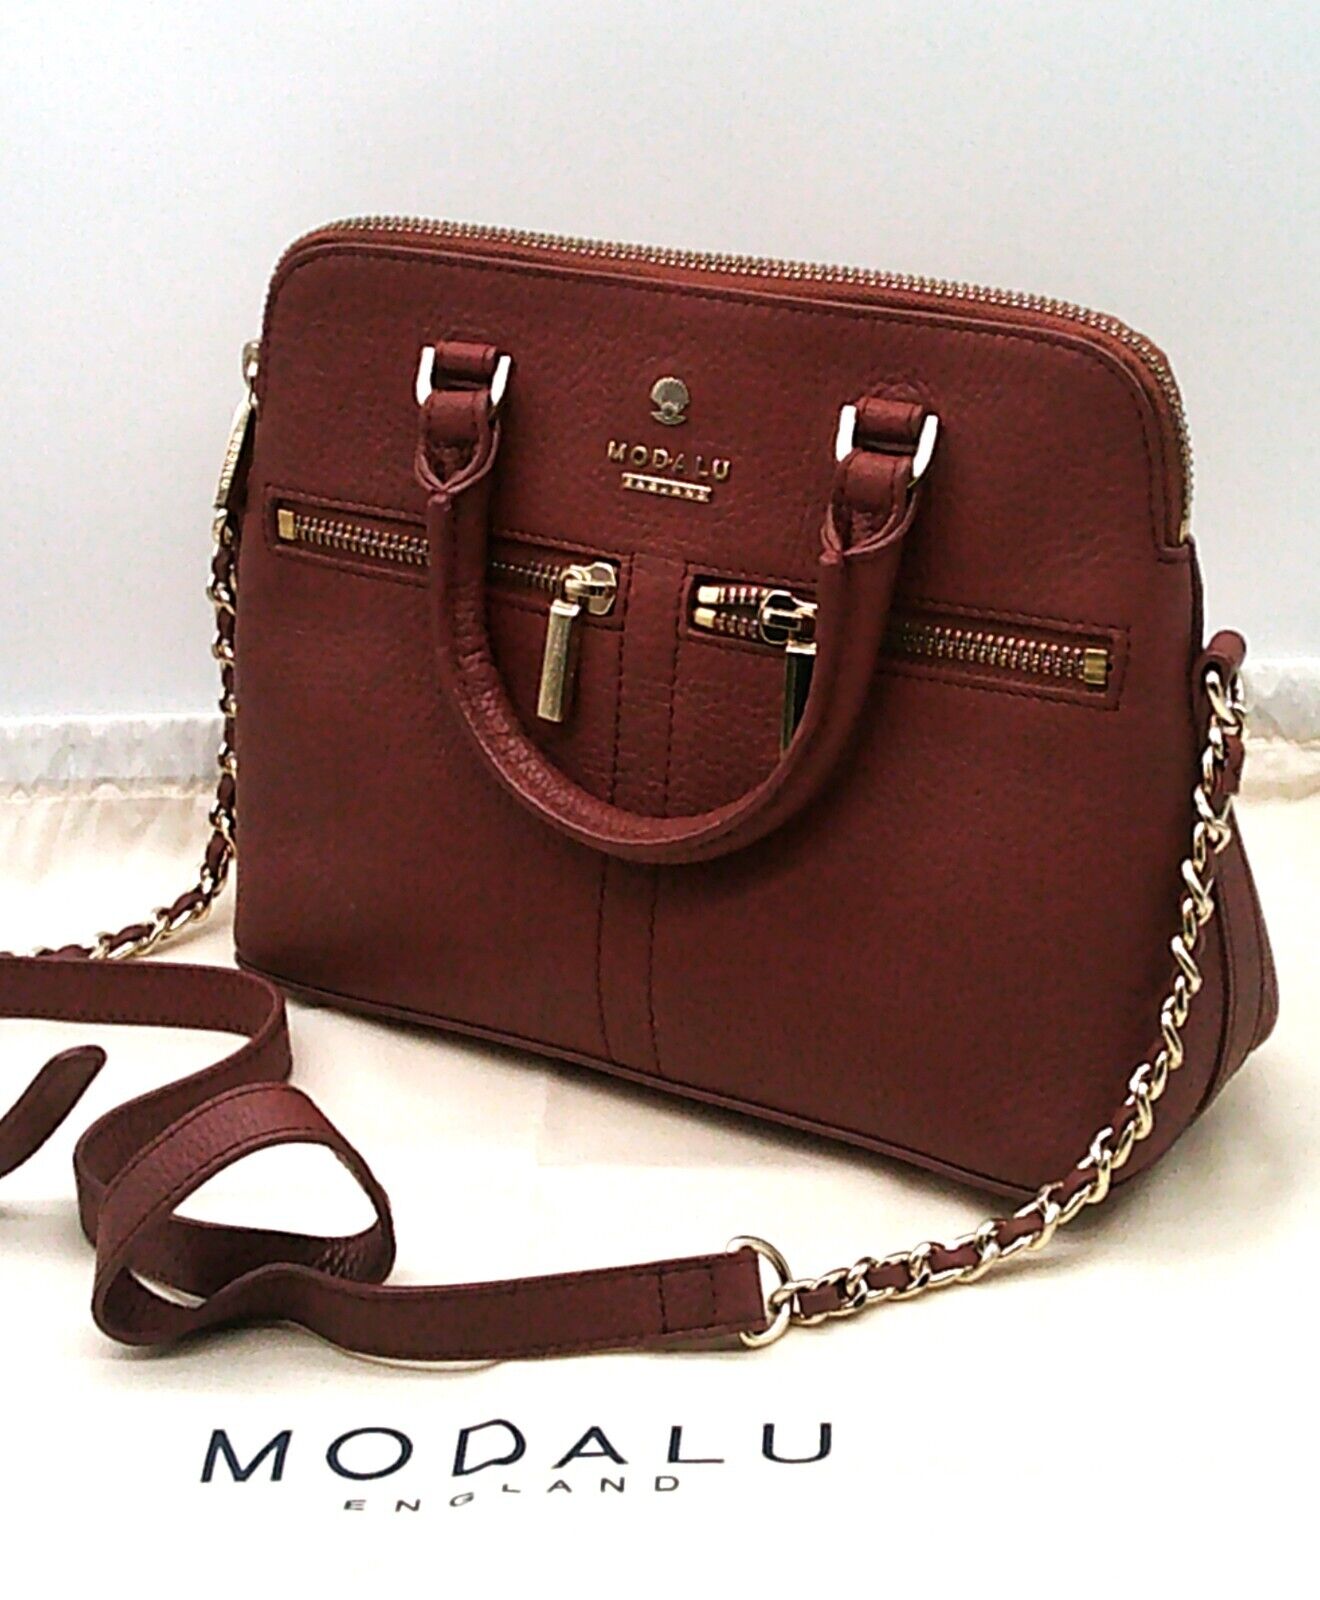 Leather Modalu Pippa Chained Crossbody Bag £149